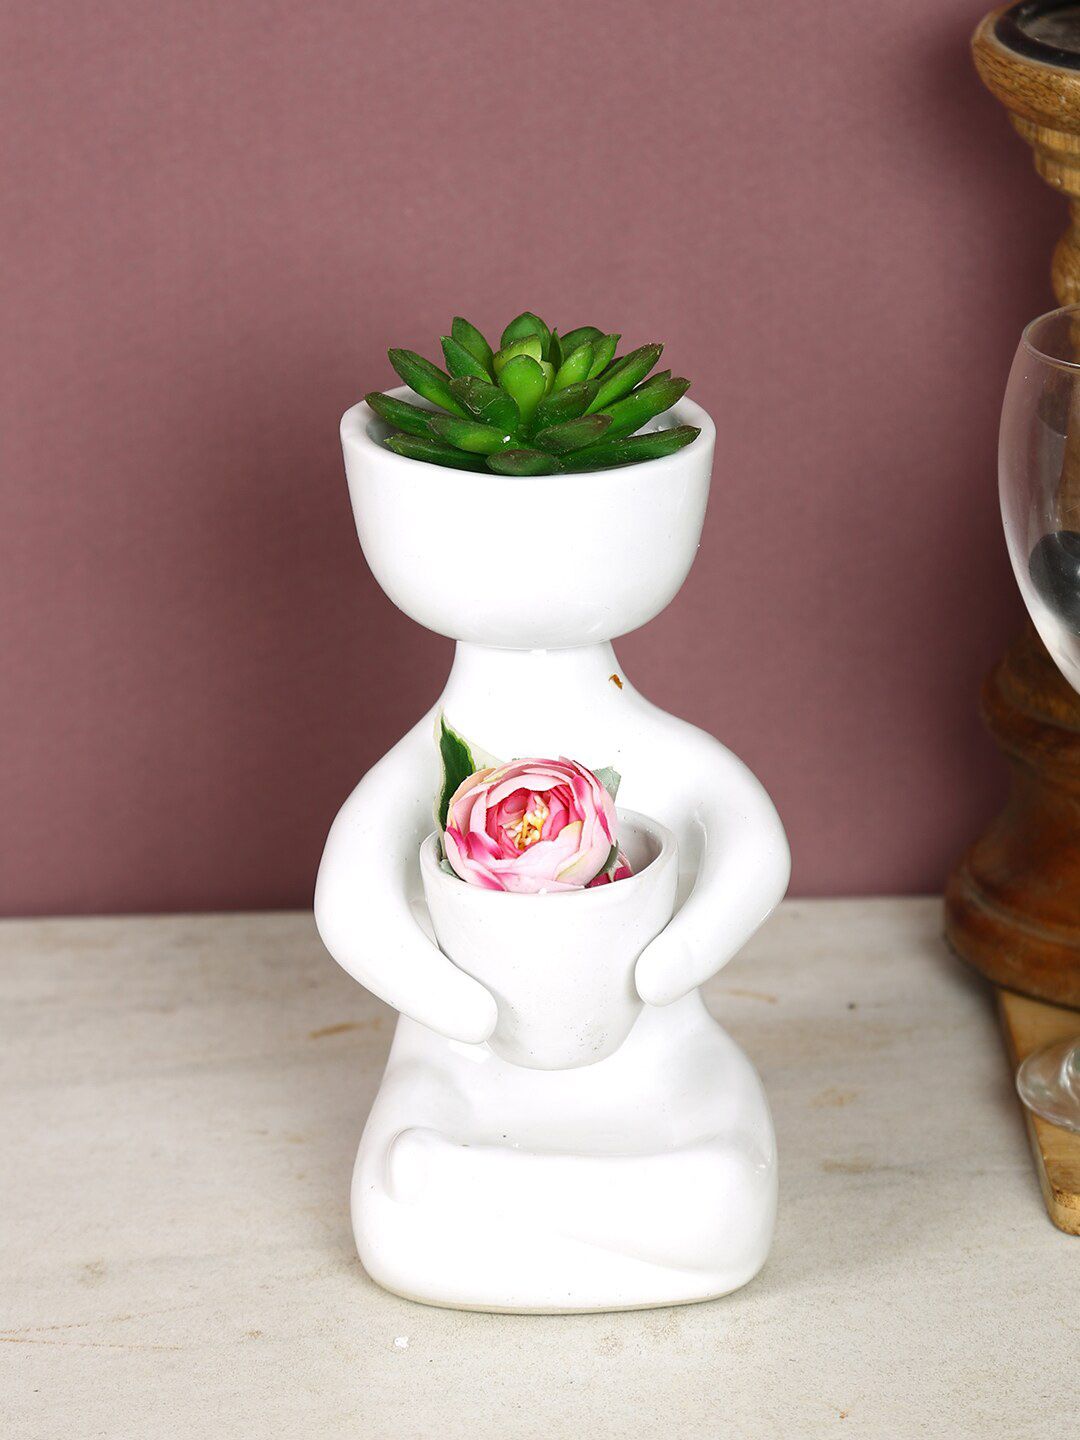 Aapno Rajasthan White Solid Head Mini Shaped Ceremic Planter Pot Price in India